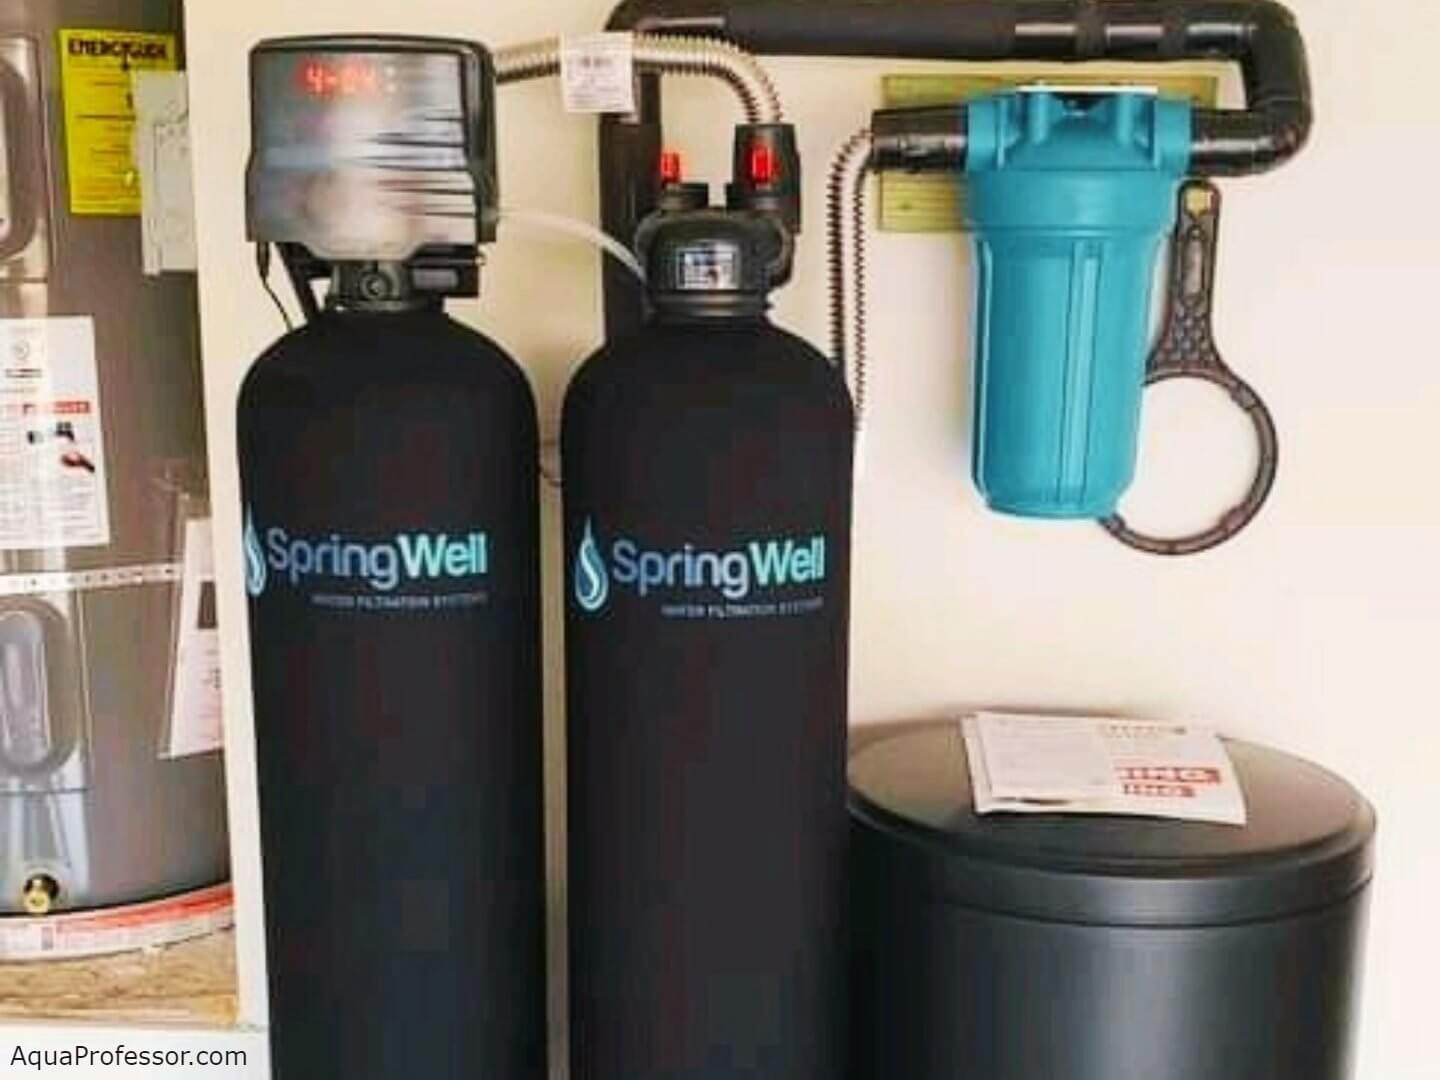 1. SpringWell Whole House Water Filtration System